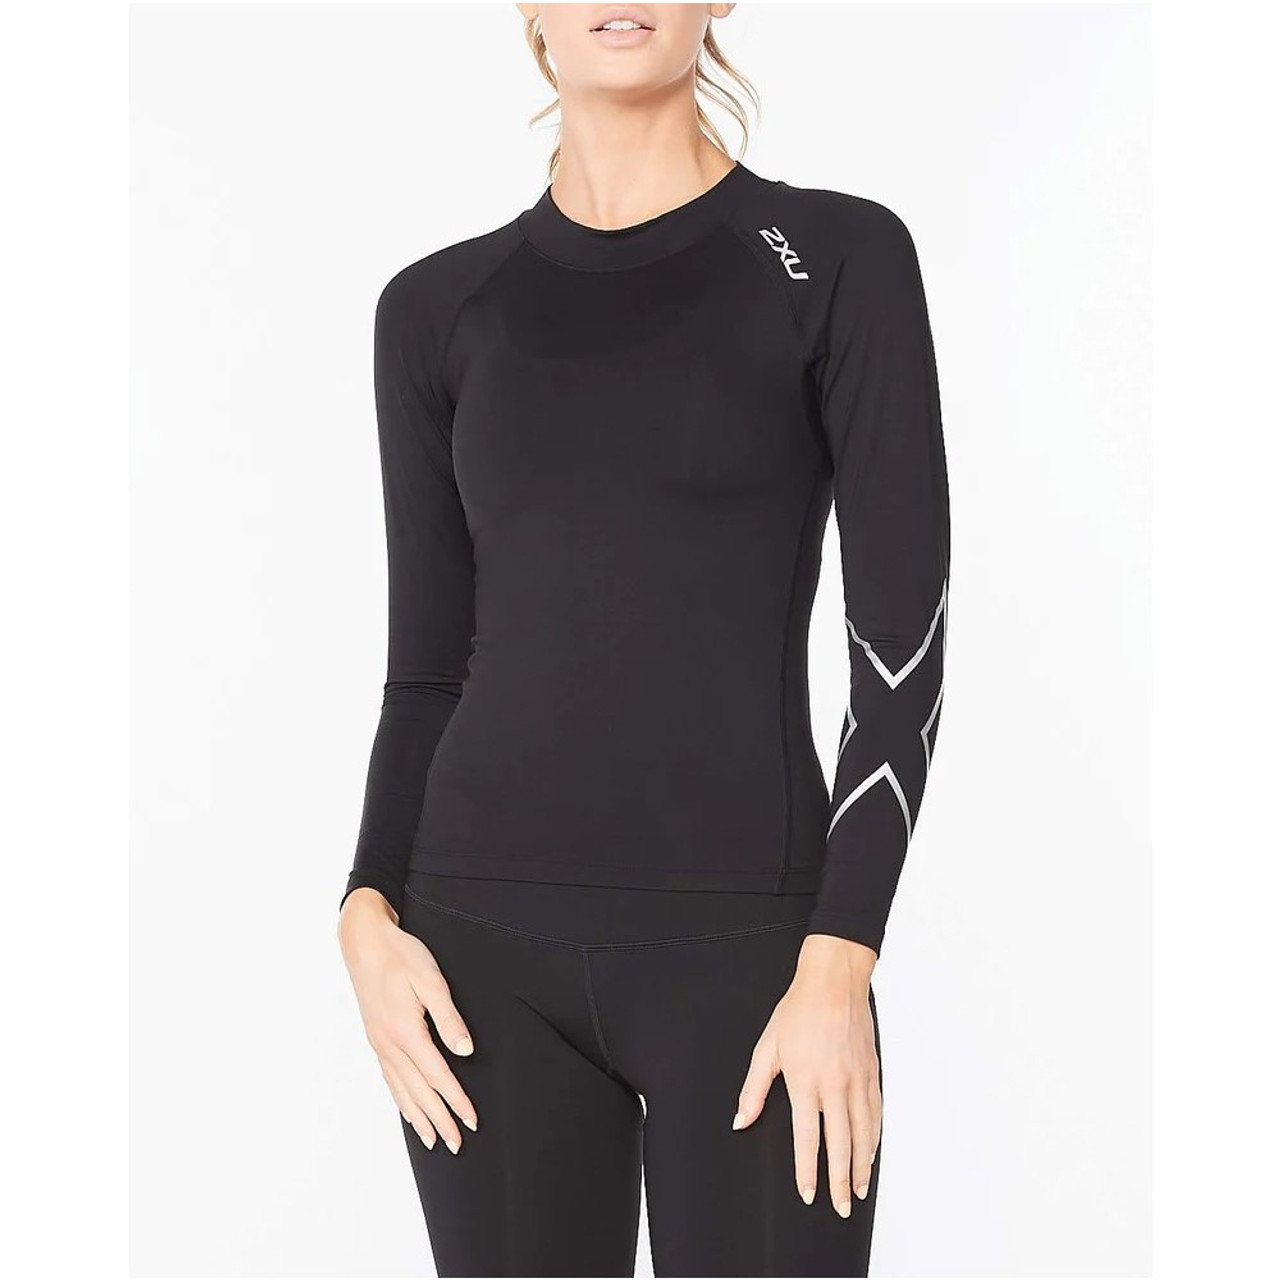 2XU Women's Ignition Compression Thermal Long Top